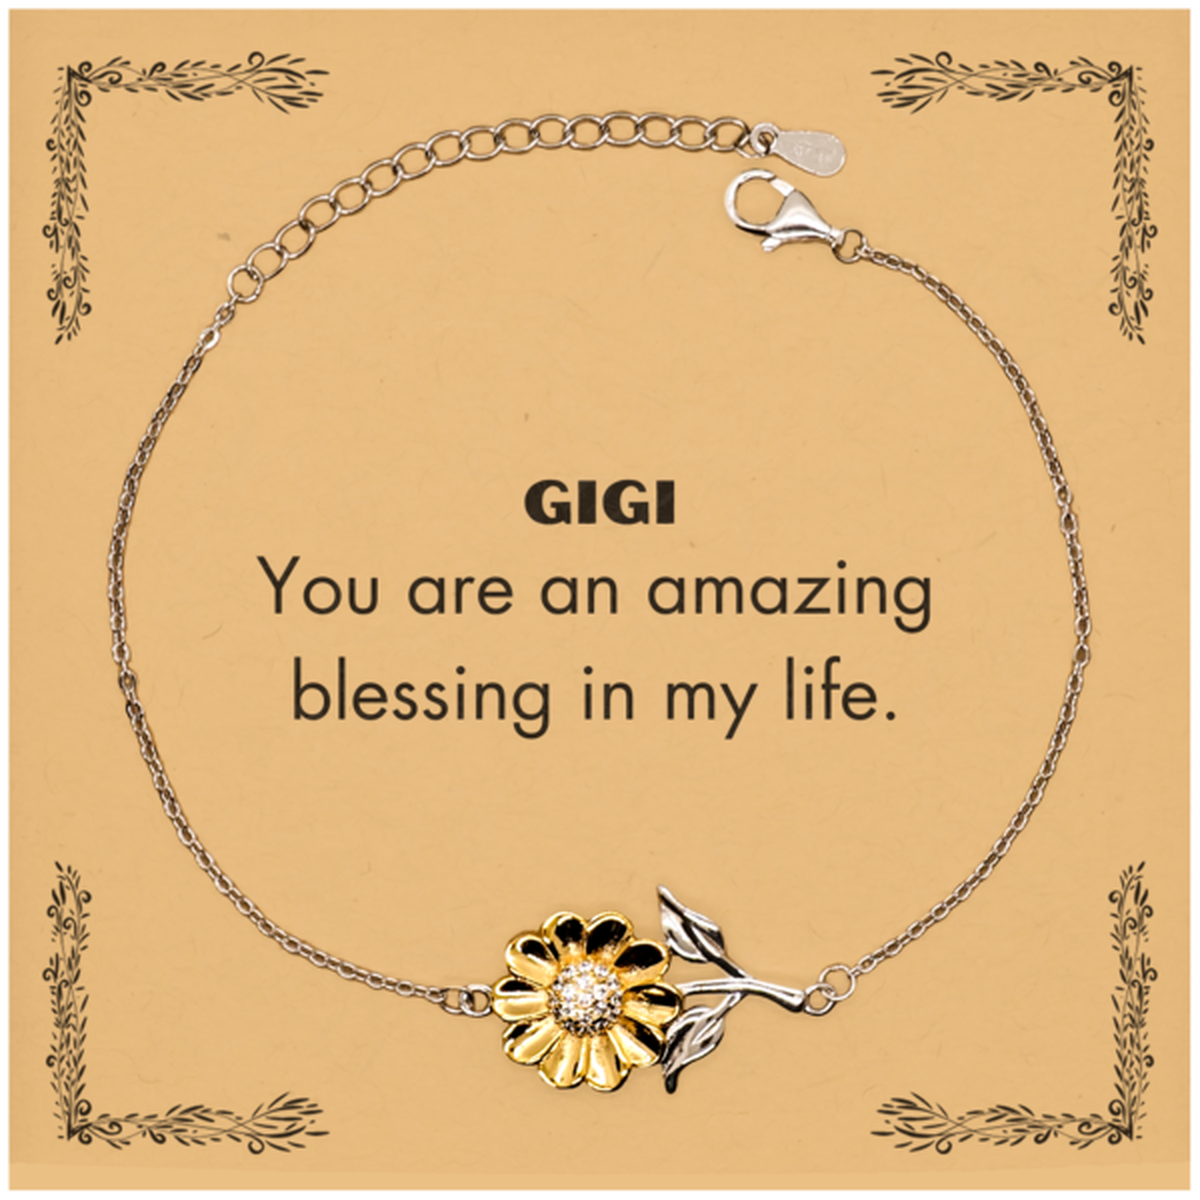 Gigi Sunflower Bracelet, You are an amazing blessing in my life, Thank You Gifts For Gigi, Inspirational Birthday Christmas Unique Gifts For Gigi